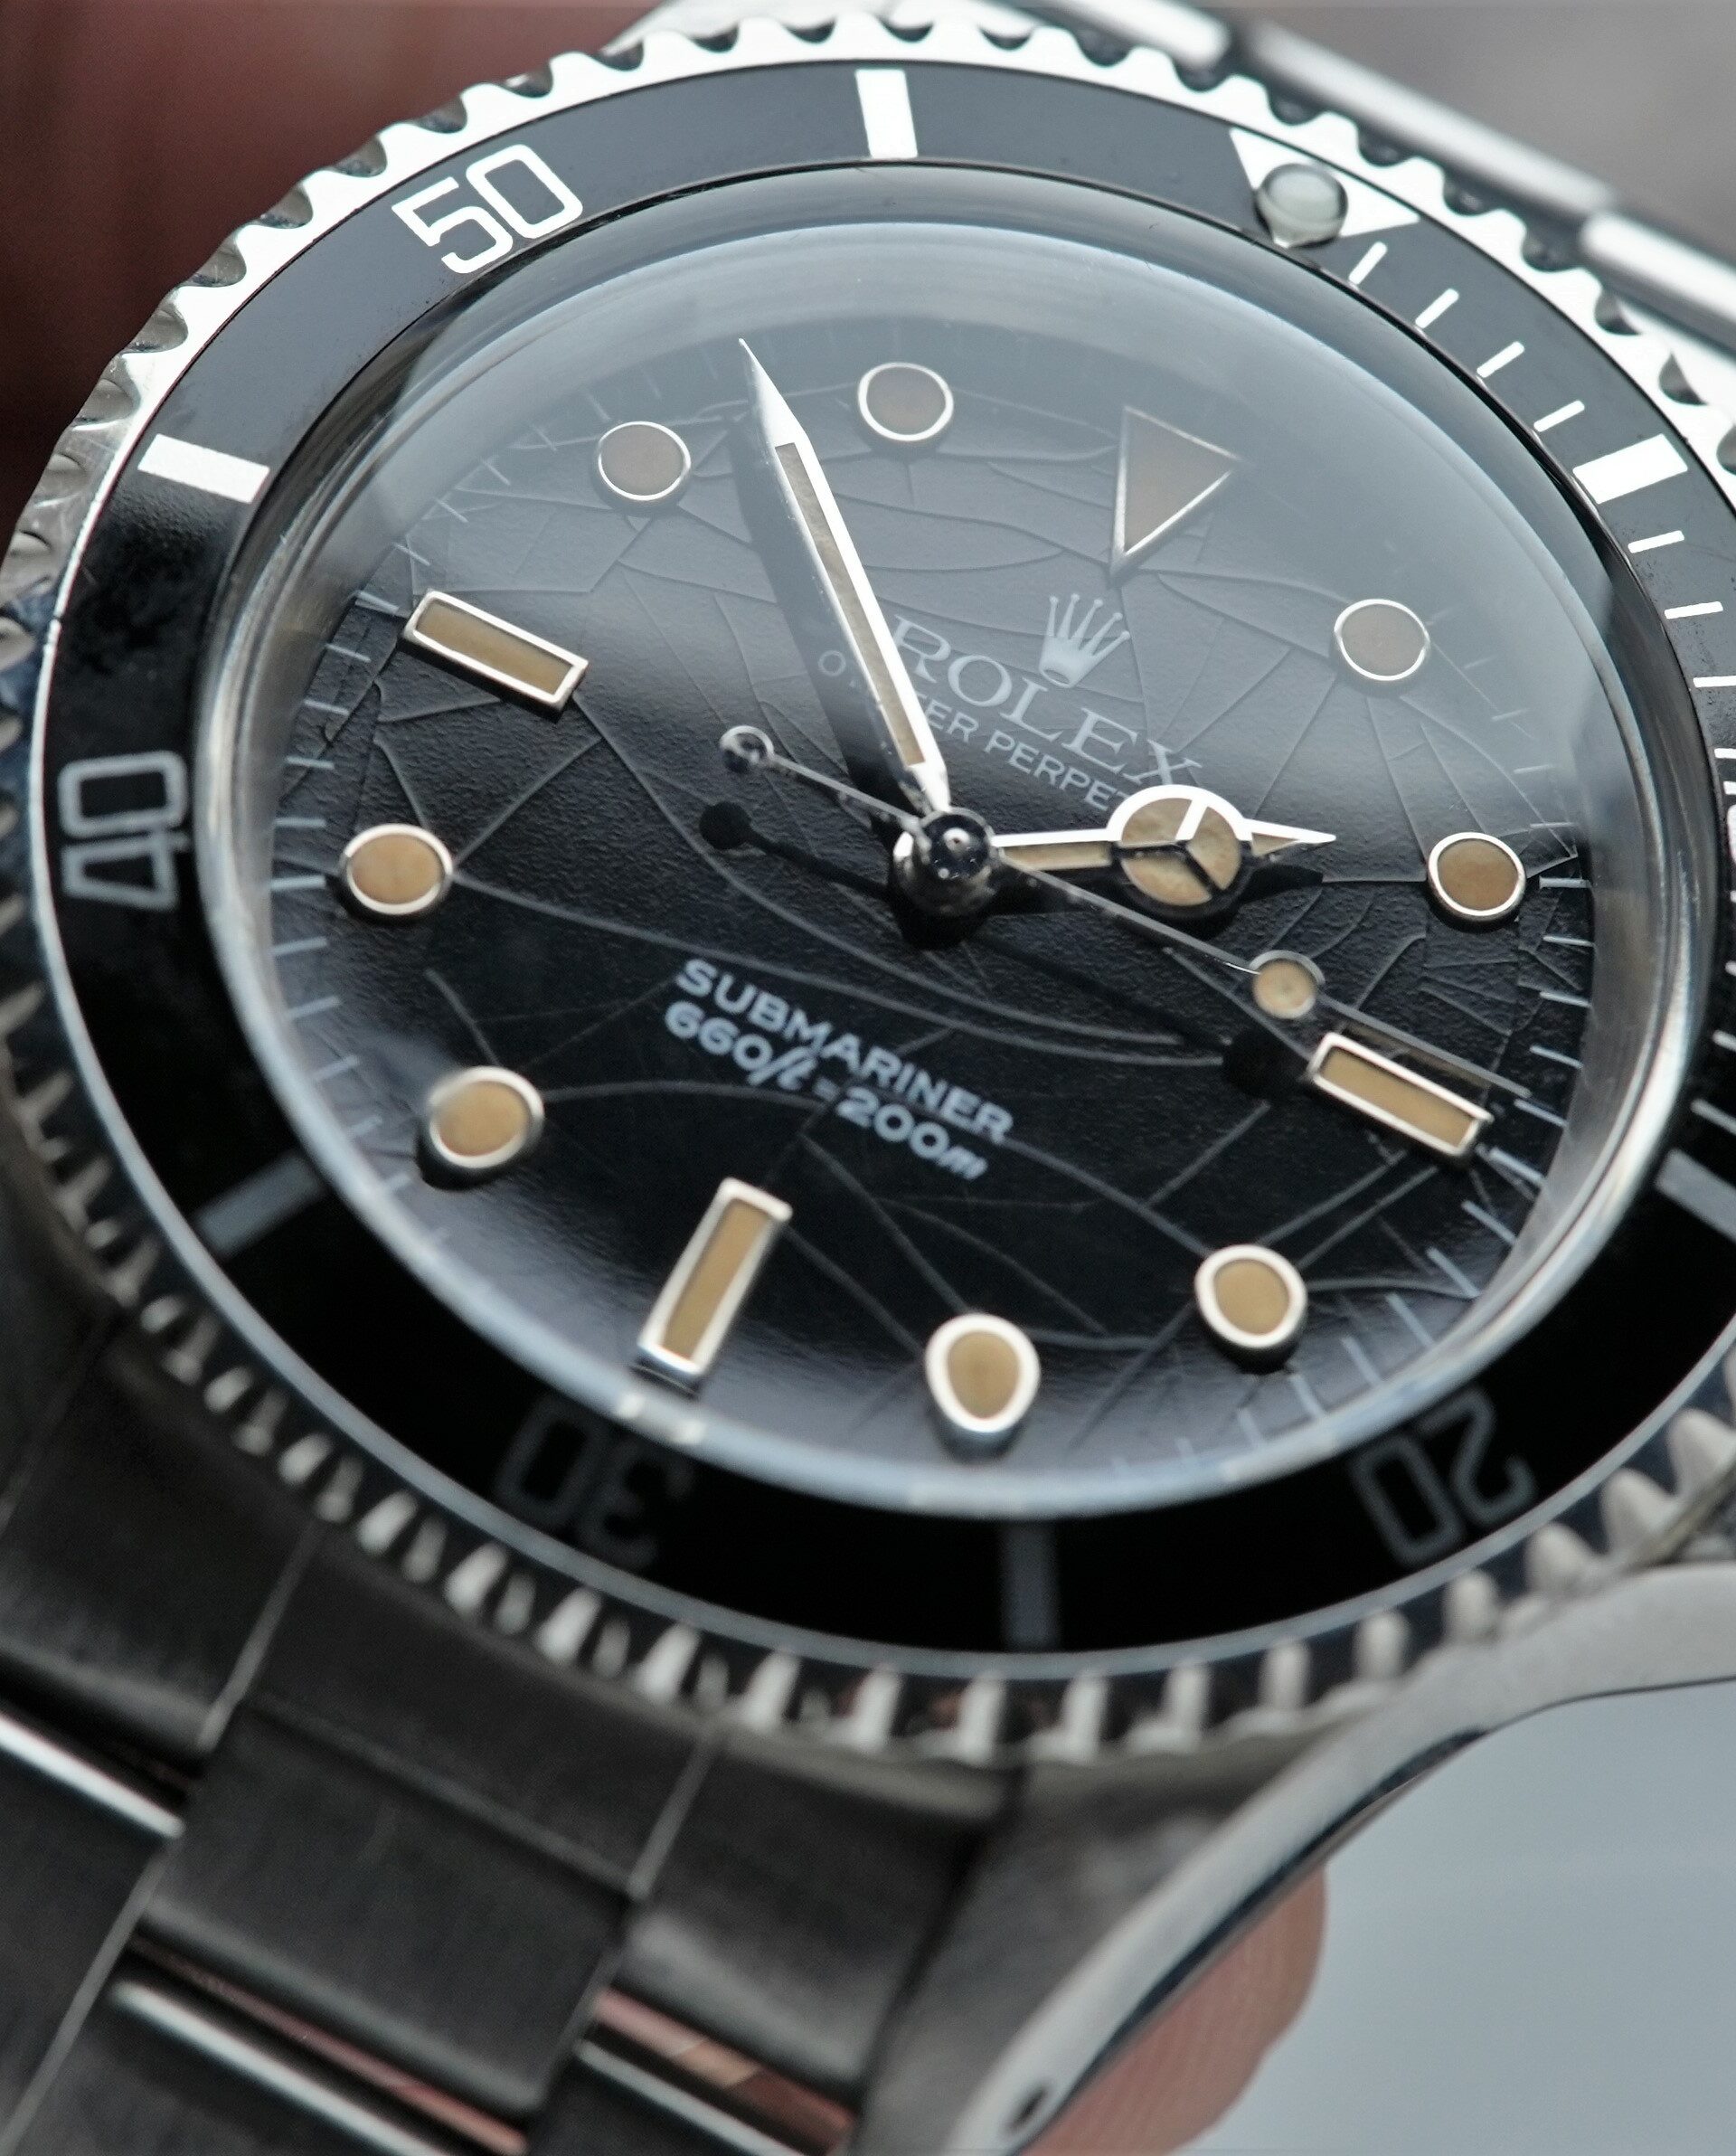 Rolex Submariner 5513 1979 Mark 3. Spider dial featured under perfect light to catch the 